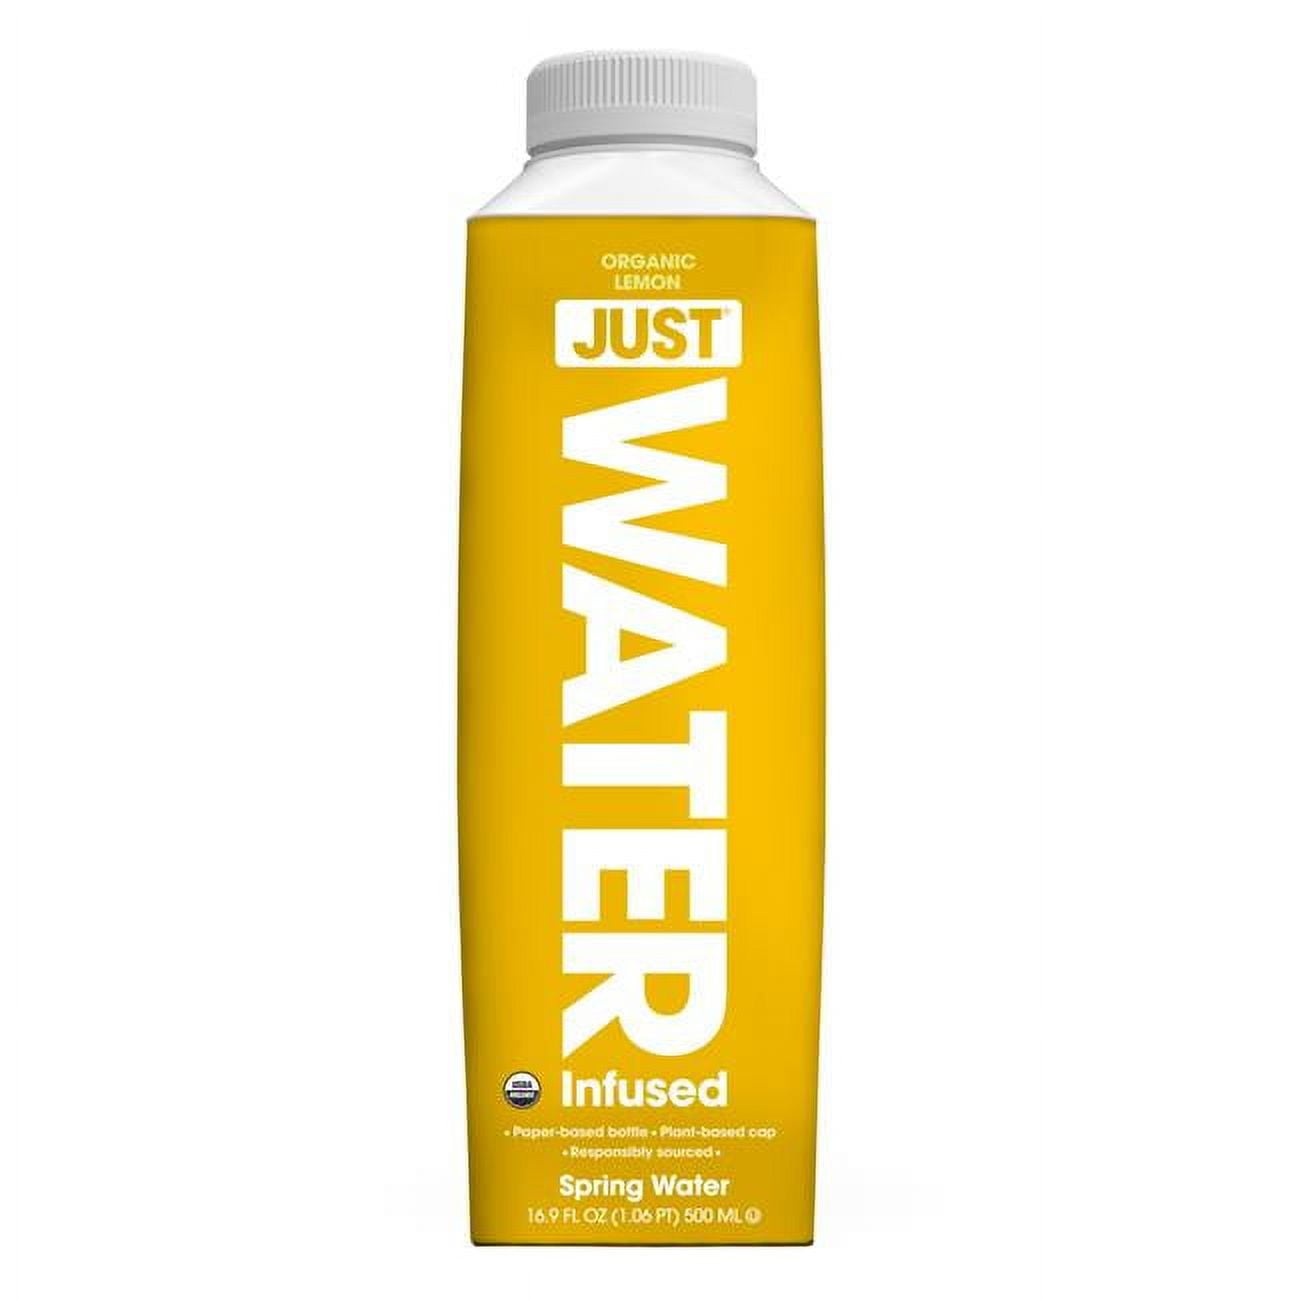 JUST Water Flavored Water 16.9 Oz. 12/Carton JGD00714 